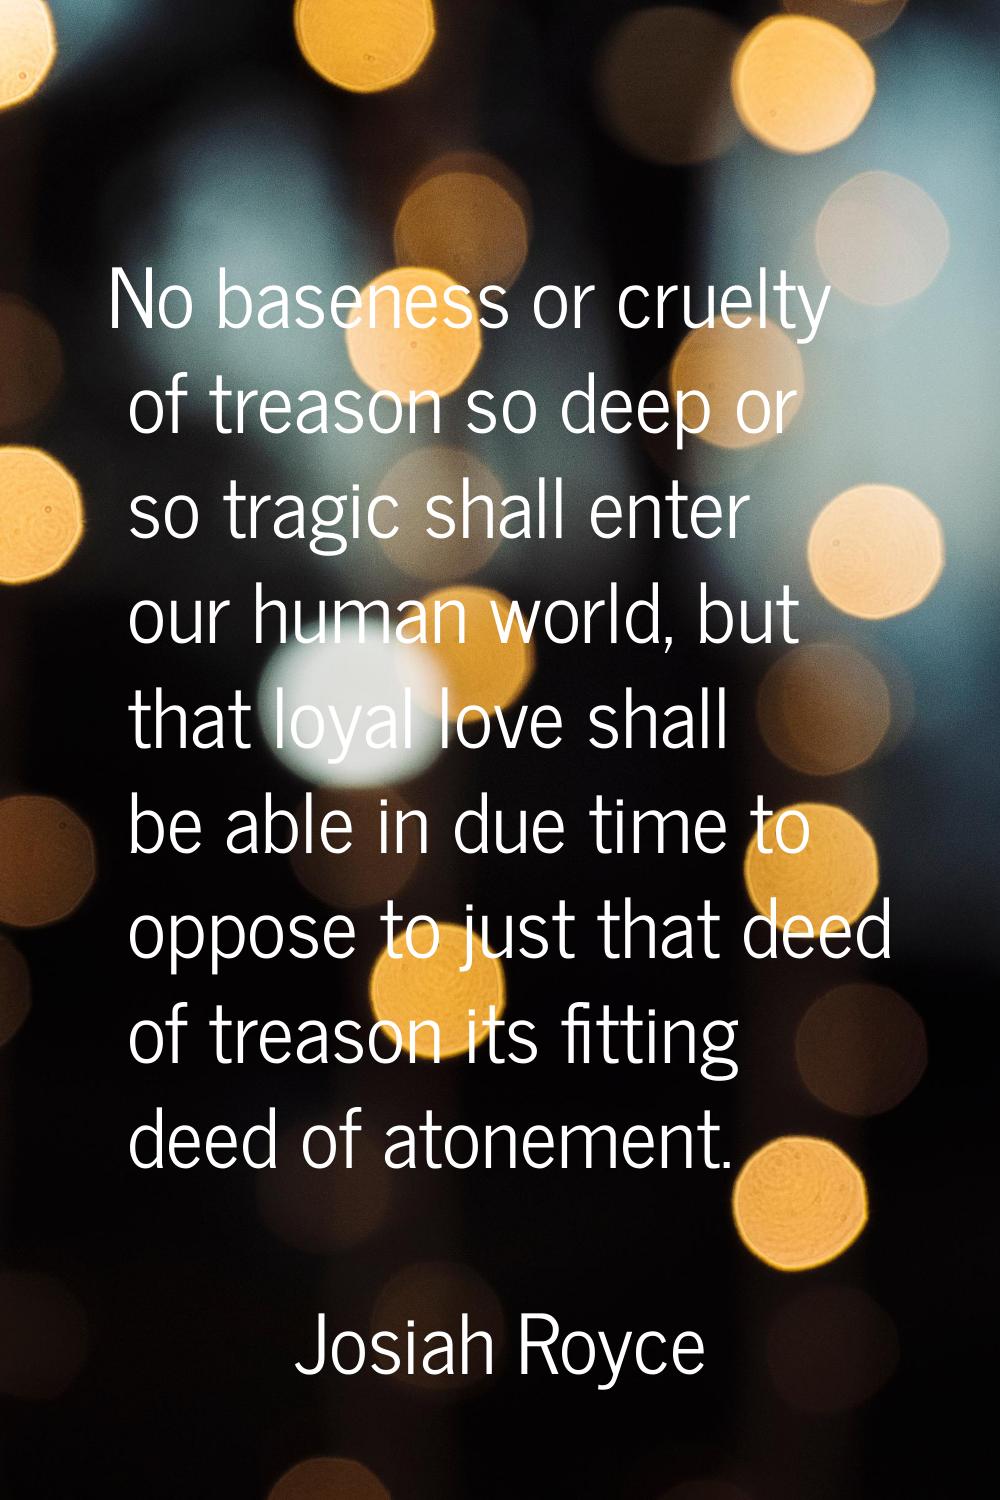 No baseness or cruelty of treason so deep or so tragic shall enter our human world, but that loyal 